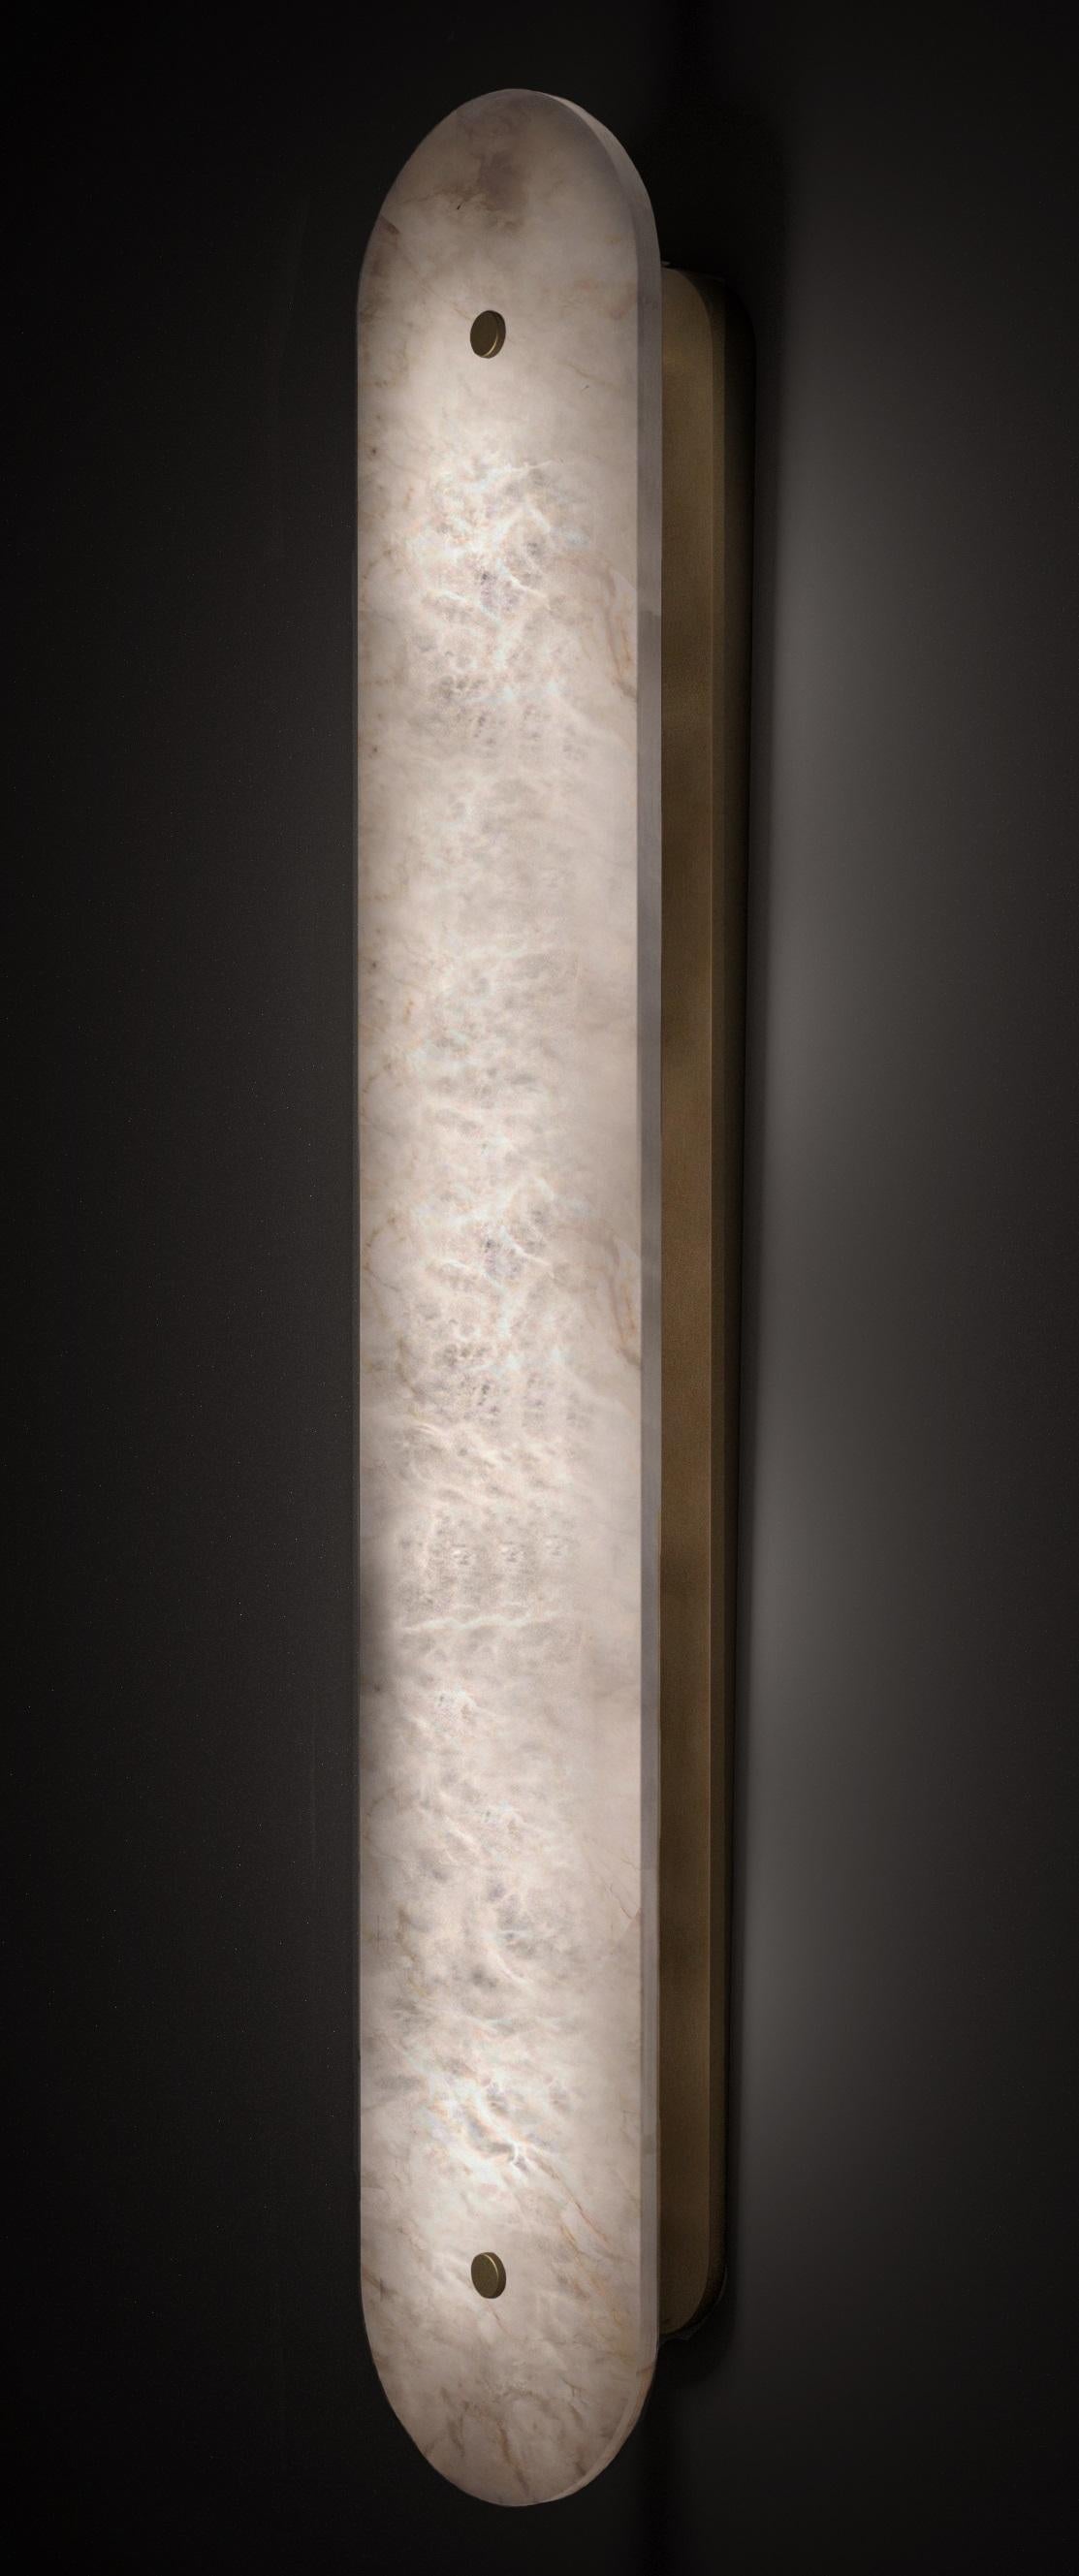 Hikari Large Brushed Brass Applique by Alabastro Italiano
Dimensions: Ø 15 x H 80 cm.
Materials: White alabaster and brushed brass.

Available in different finishes: Shiny Silver, Bronze, Brushed Brass, Ruggine of Florence, Brushed Burnished, Shiny